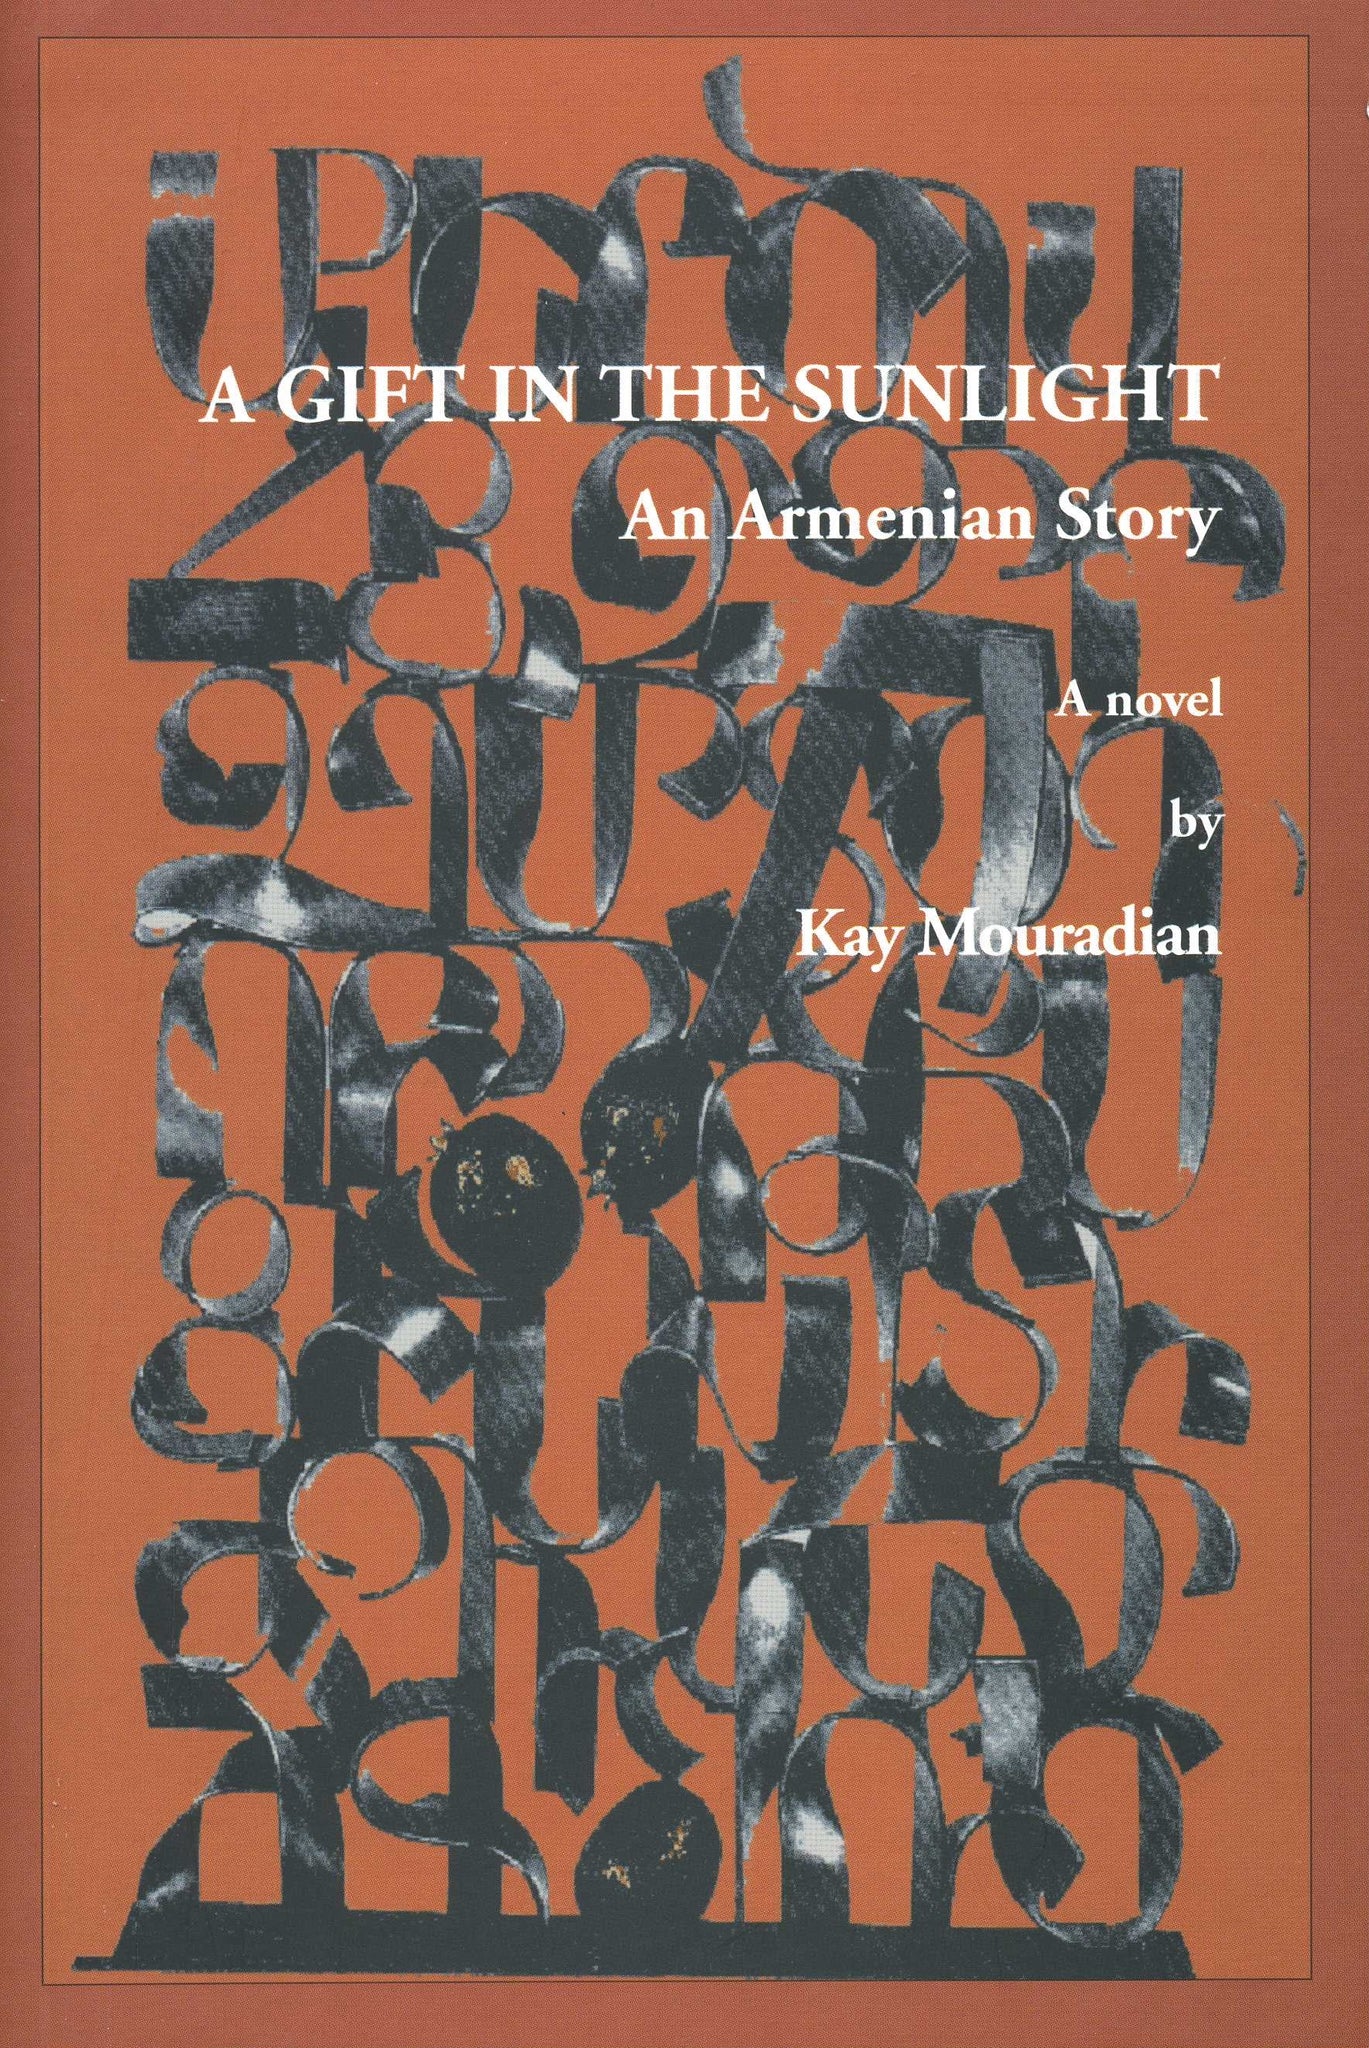 A GIFT IN THE SUNLIGHT: An Armenian Story